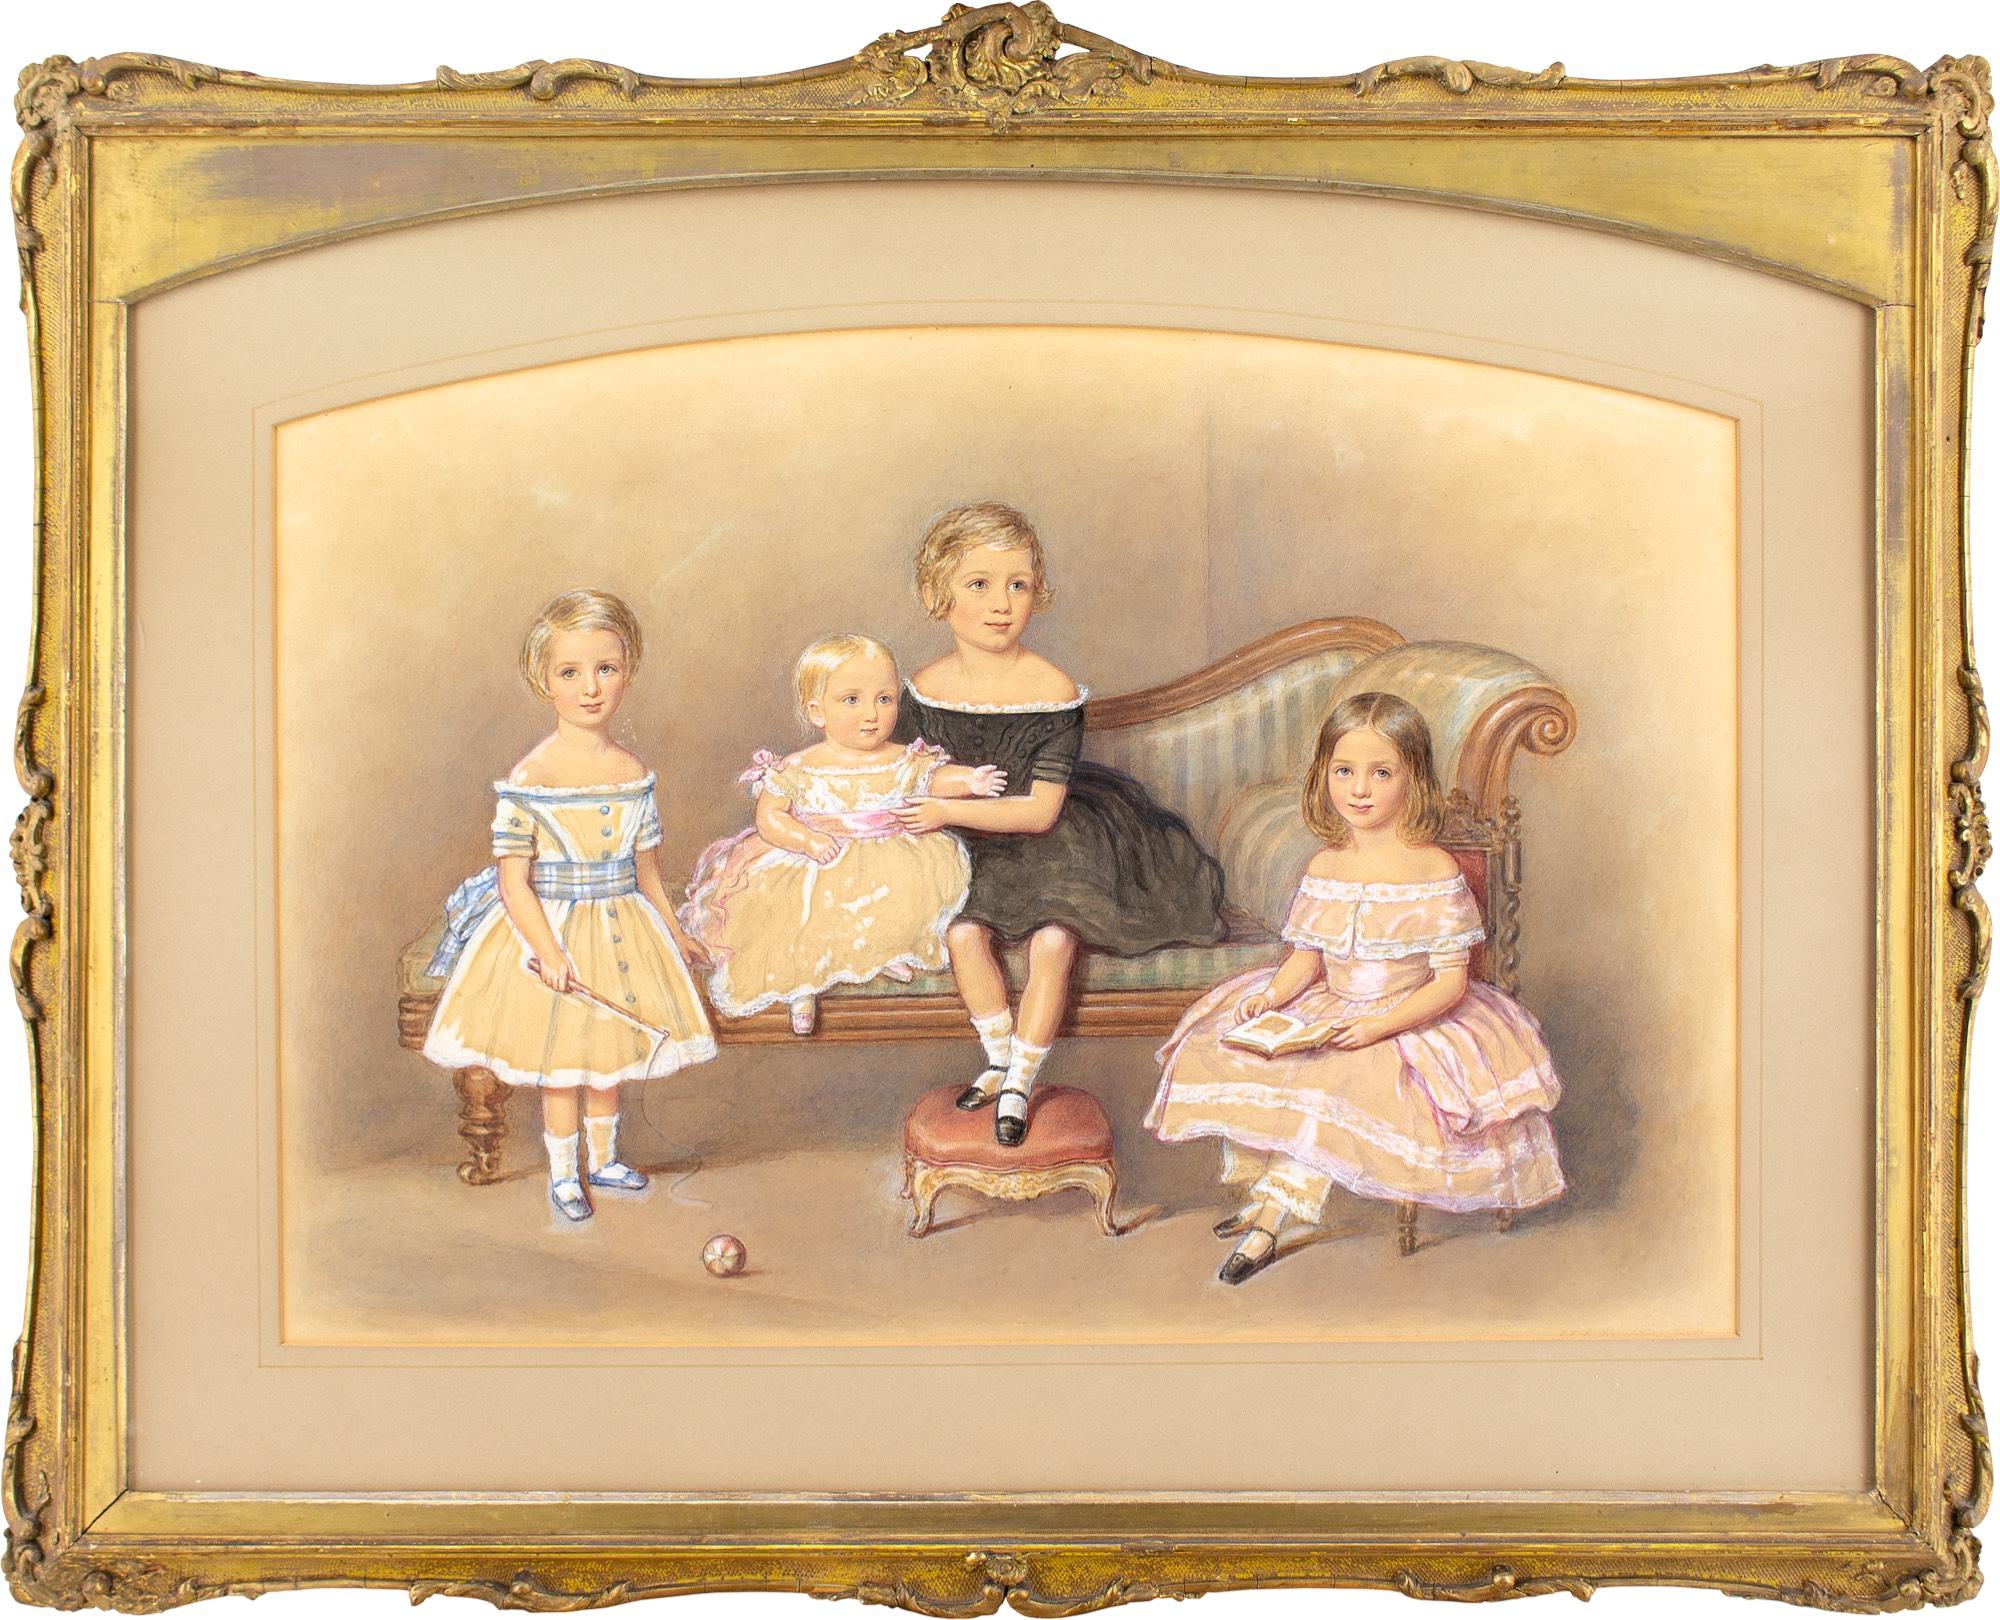 This charming mid-19th-century watercolour by British artist John George Indermaur (1818-1862) depicts four children, a chaise lounge, and footstool. It was shown at the Royal Society of British Artists in 1847.

Smartly attired in their finest and